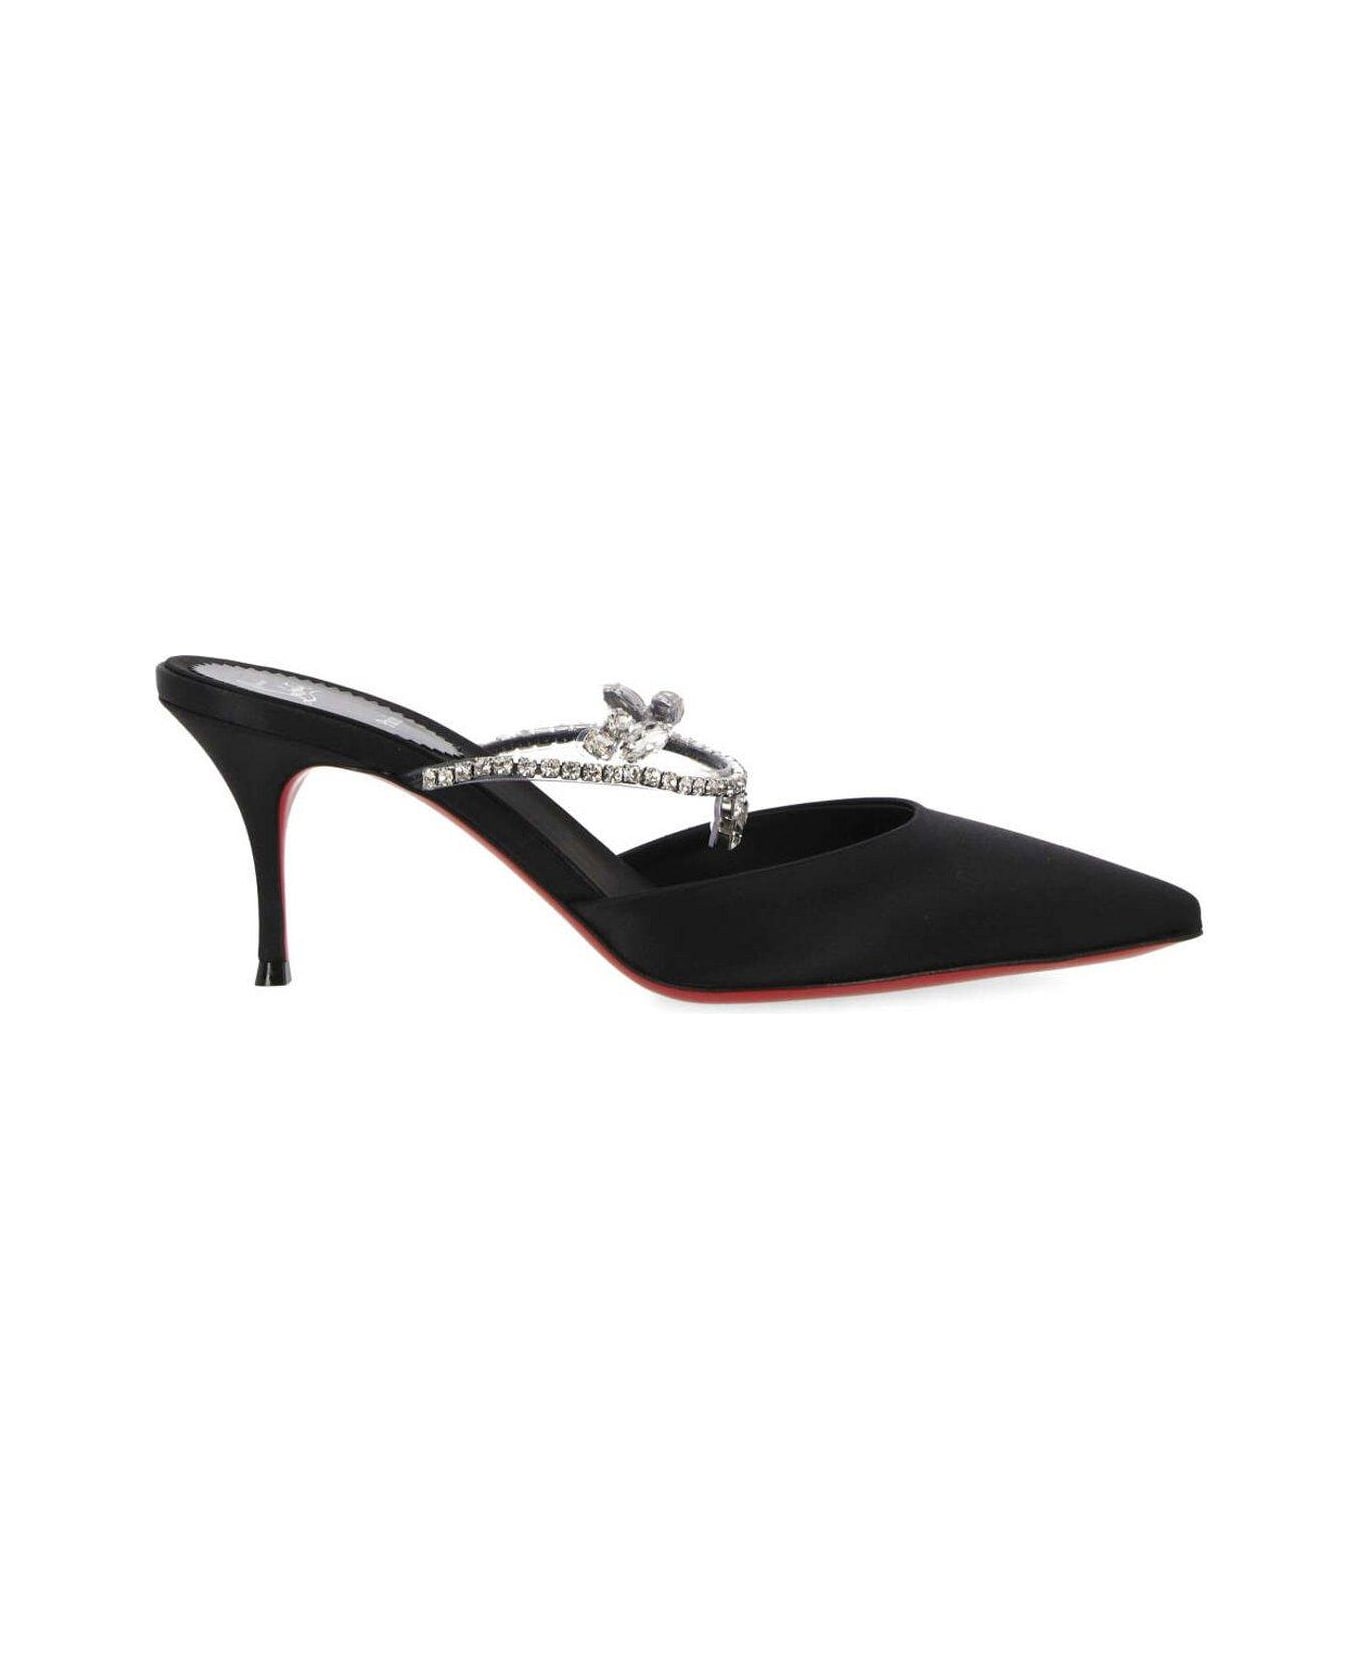 Christian Louboutin Pointed-toe Pumps - Black